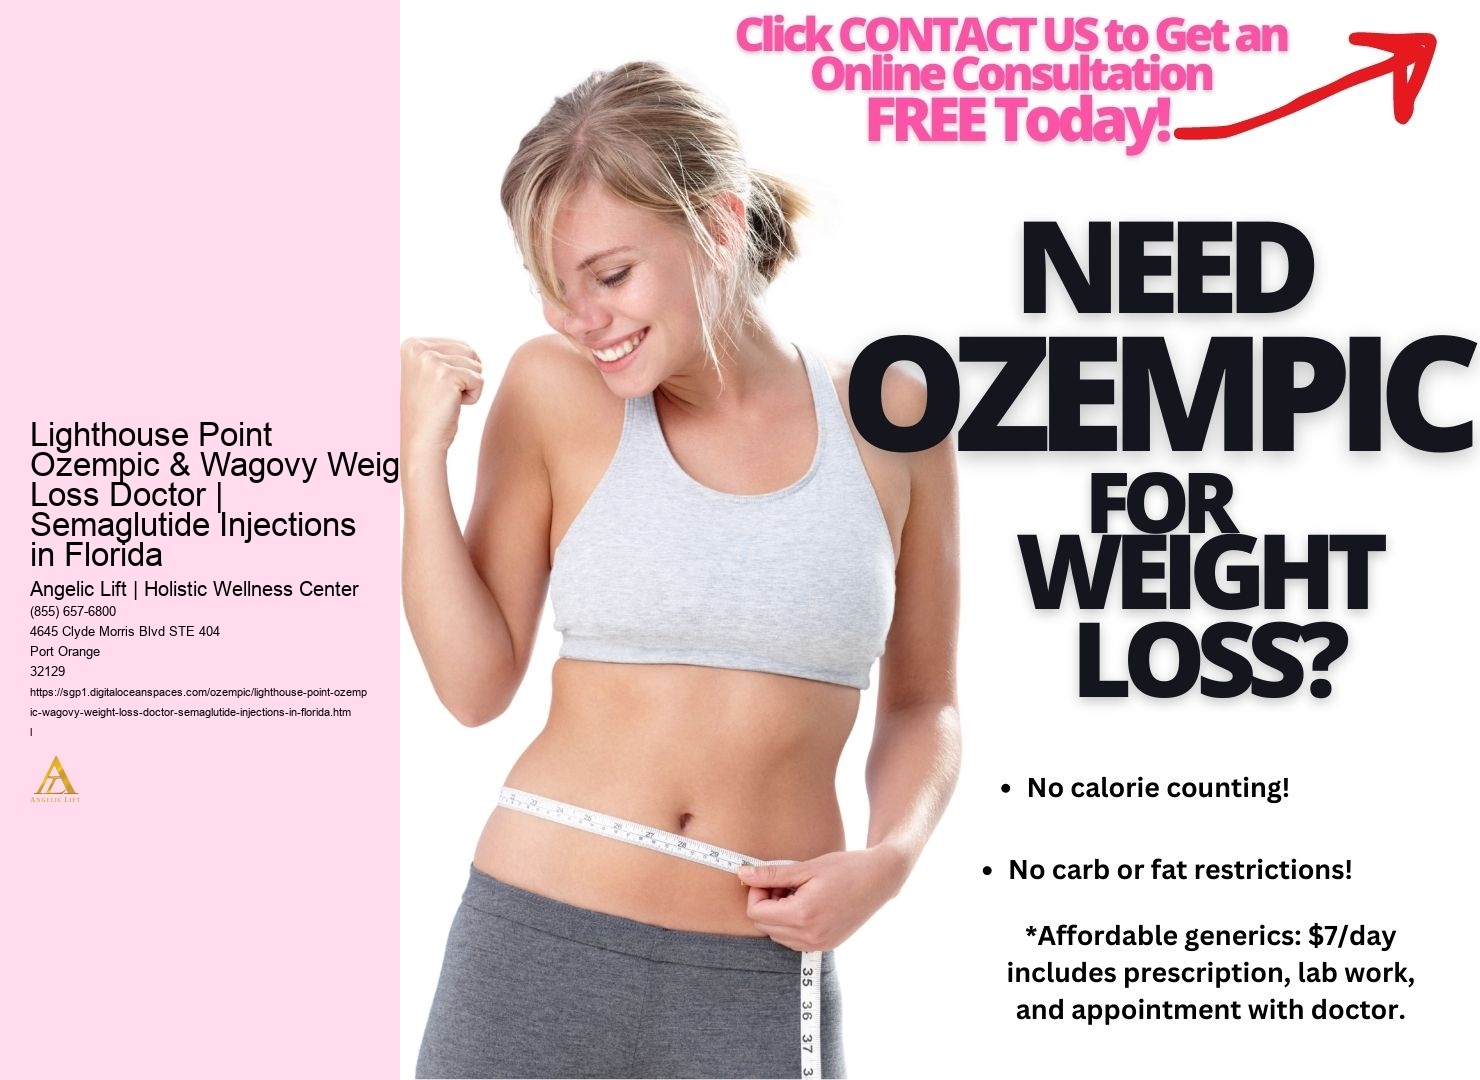 Lighthouse Point Ozempic & Wagovy Weight Loss Doctor | Semaglutide Injections in Florida